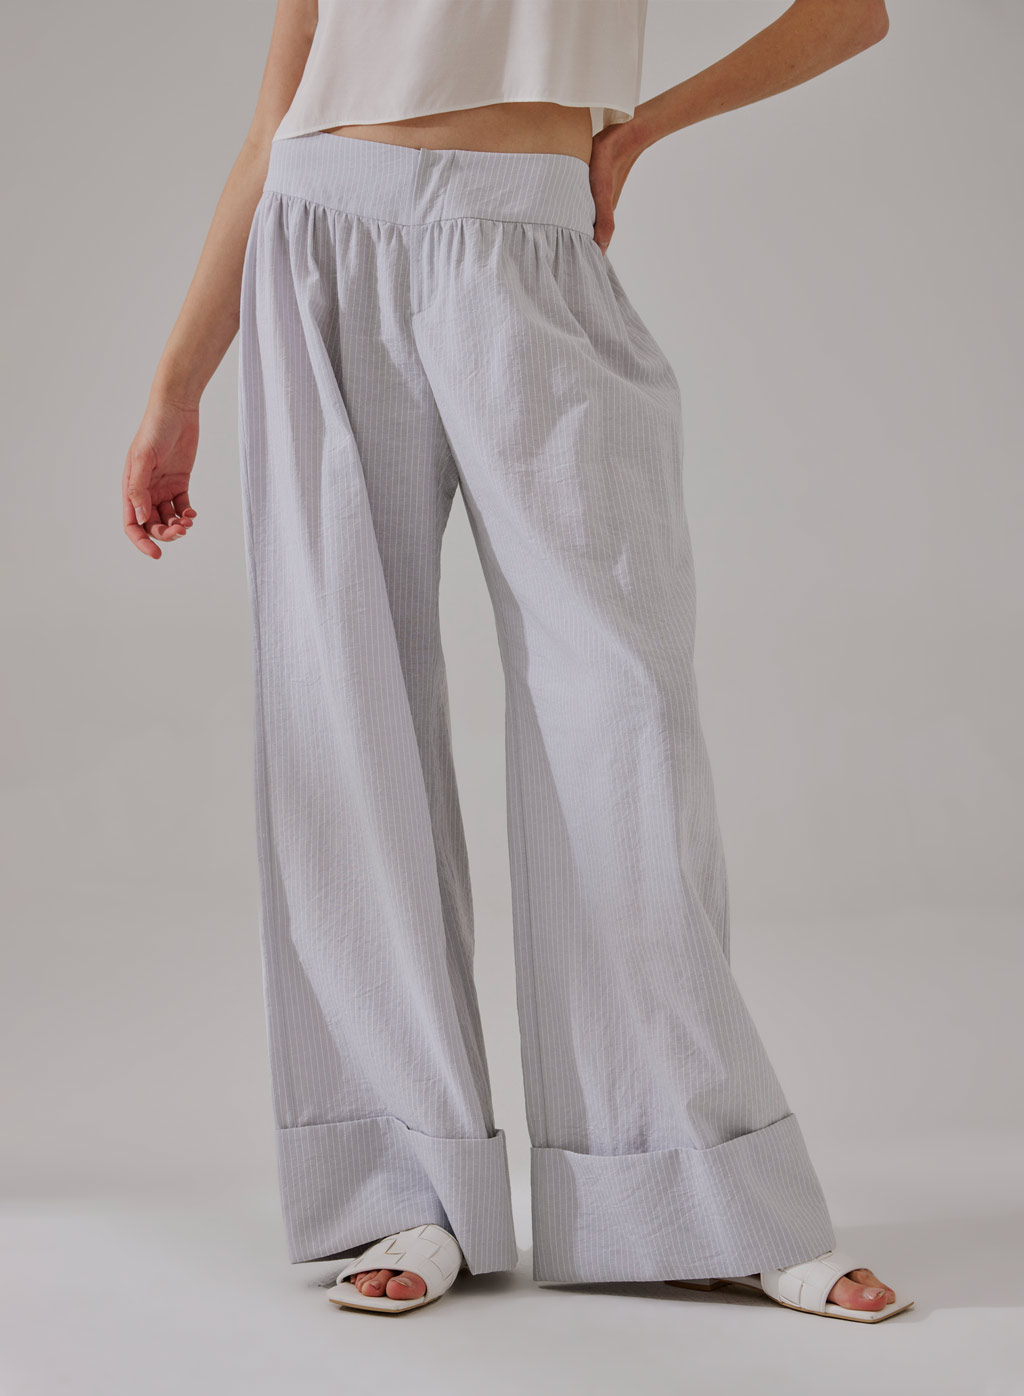 Trend Arrest Trousers and Pants  Buy Trend Arrest Vertical Striped Pants  Online  Nykaa Fashion